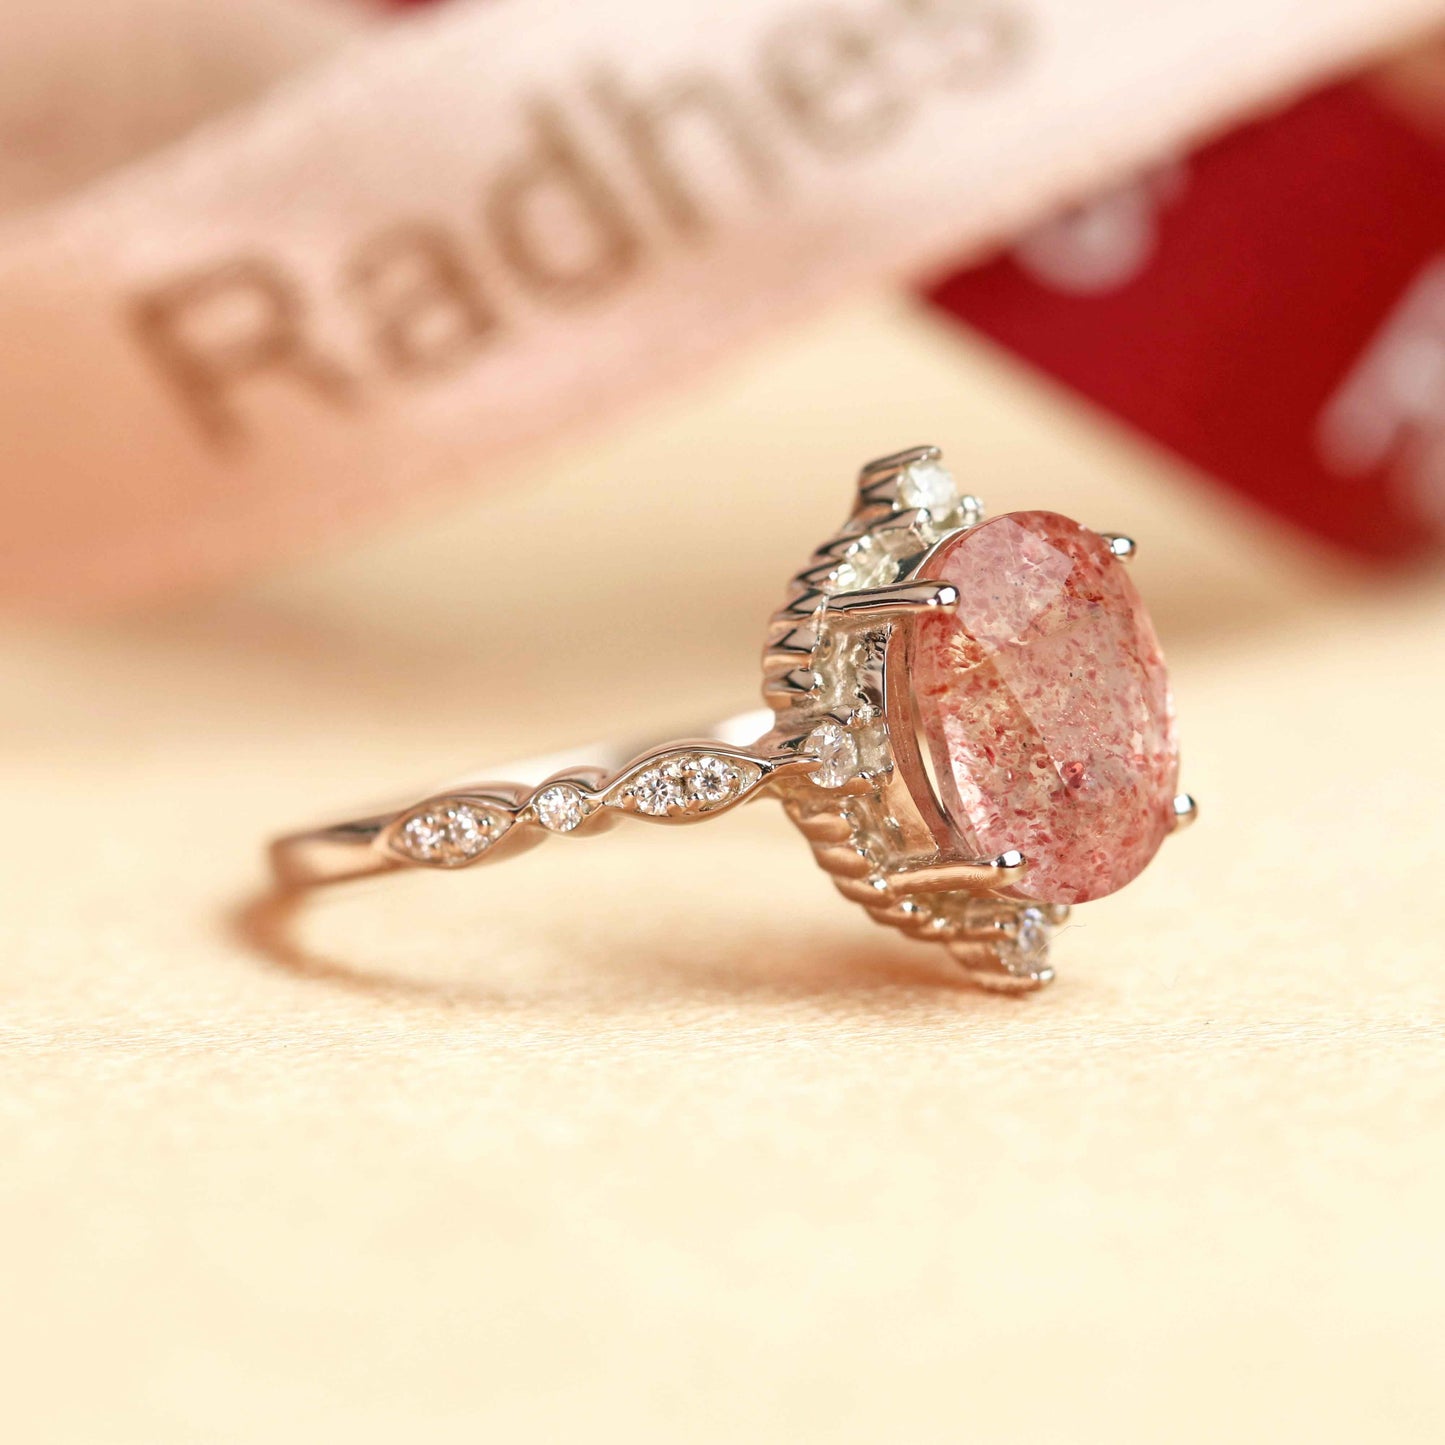 Huge Star 1.1 carat Oval Cut Red Strawberry Quartz and Diamond Marquise and Dot Bezel Ring for Women in White Gold